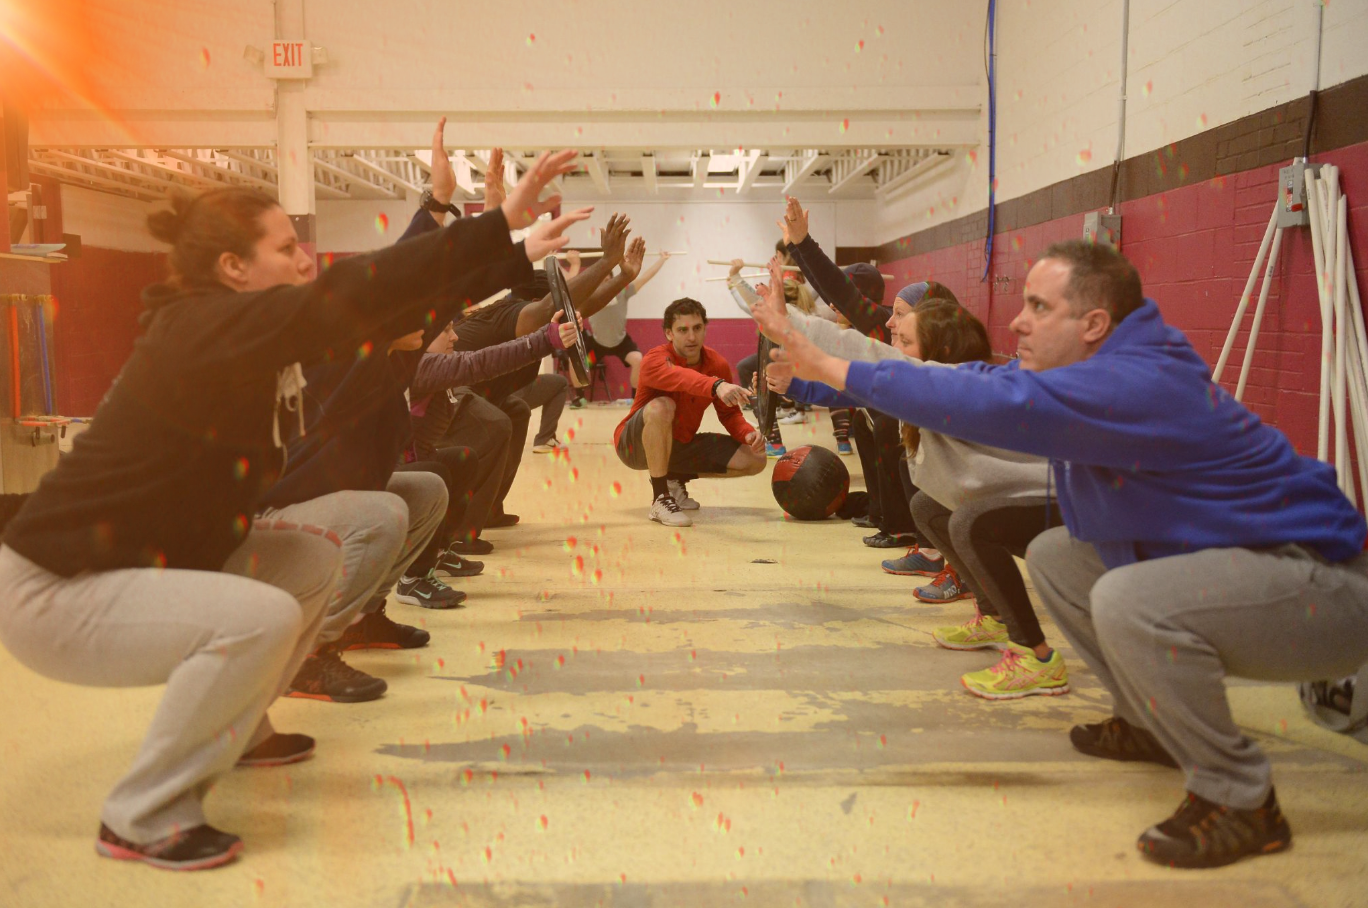  CrossFit Level 1 Certificate Course in Pittsburgh, Pennsylvania, in 2015